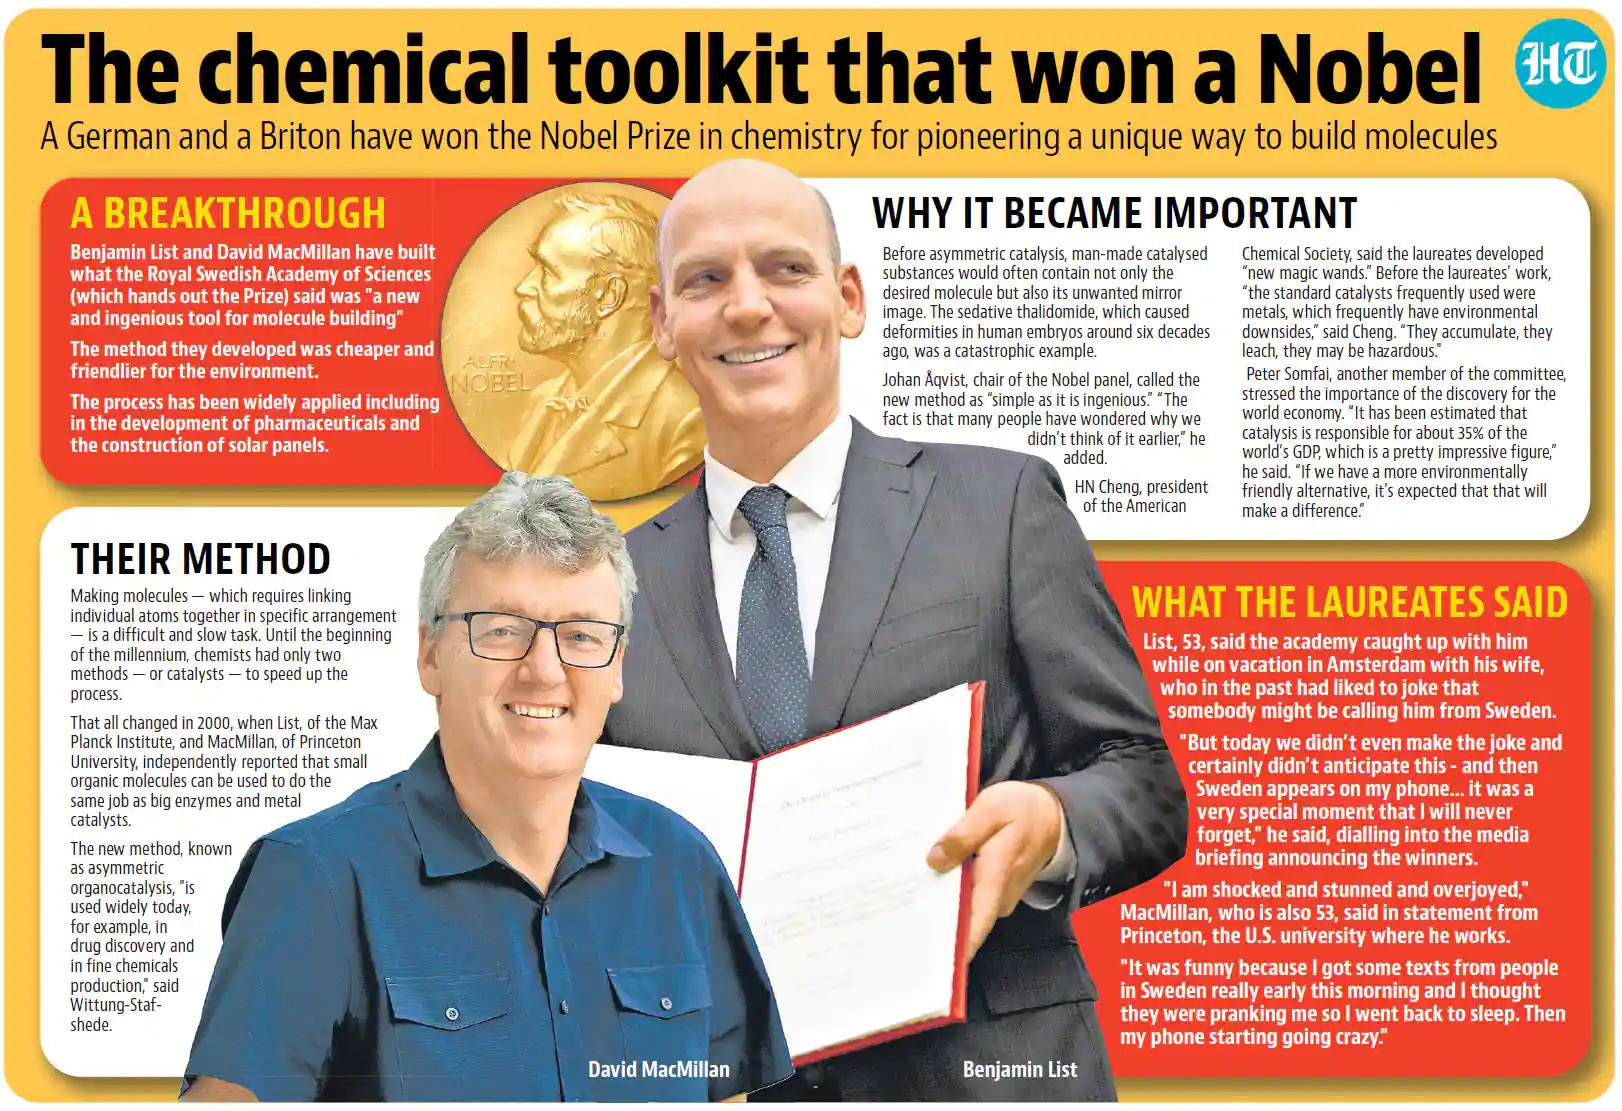 Benjamin List and David MacMillan were ‘awarded the Nobel Prize in Chemistry 2021 for their development of a precise new tool for molecular construction: organocatalysis’(HT Illustration)